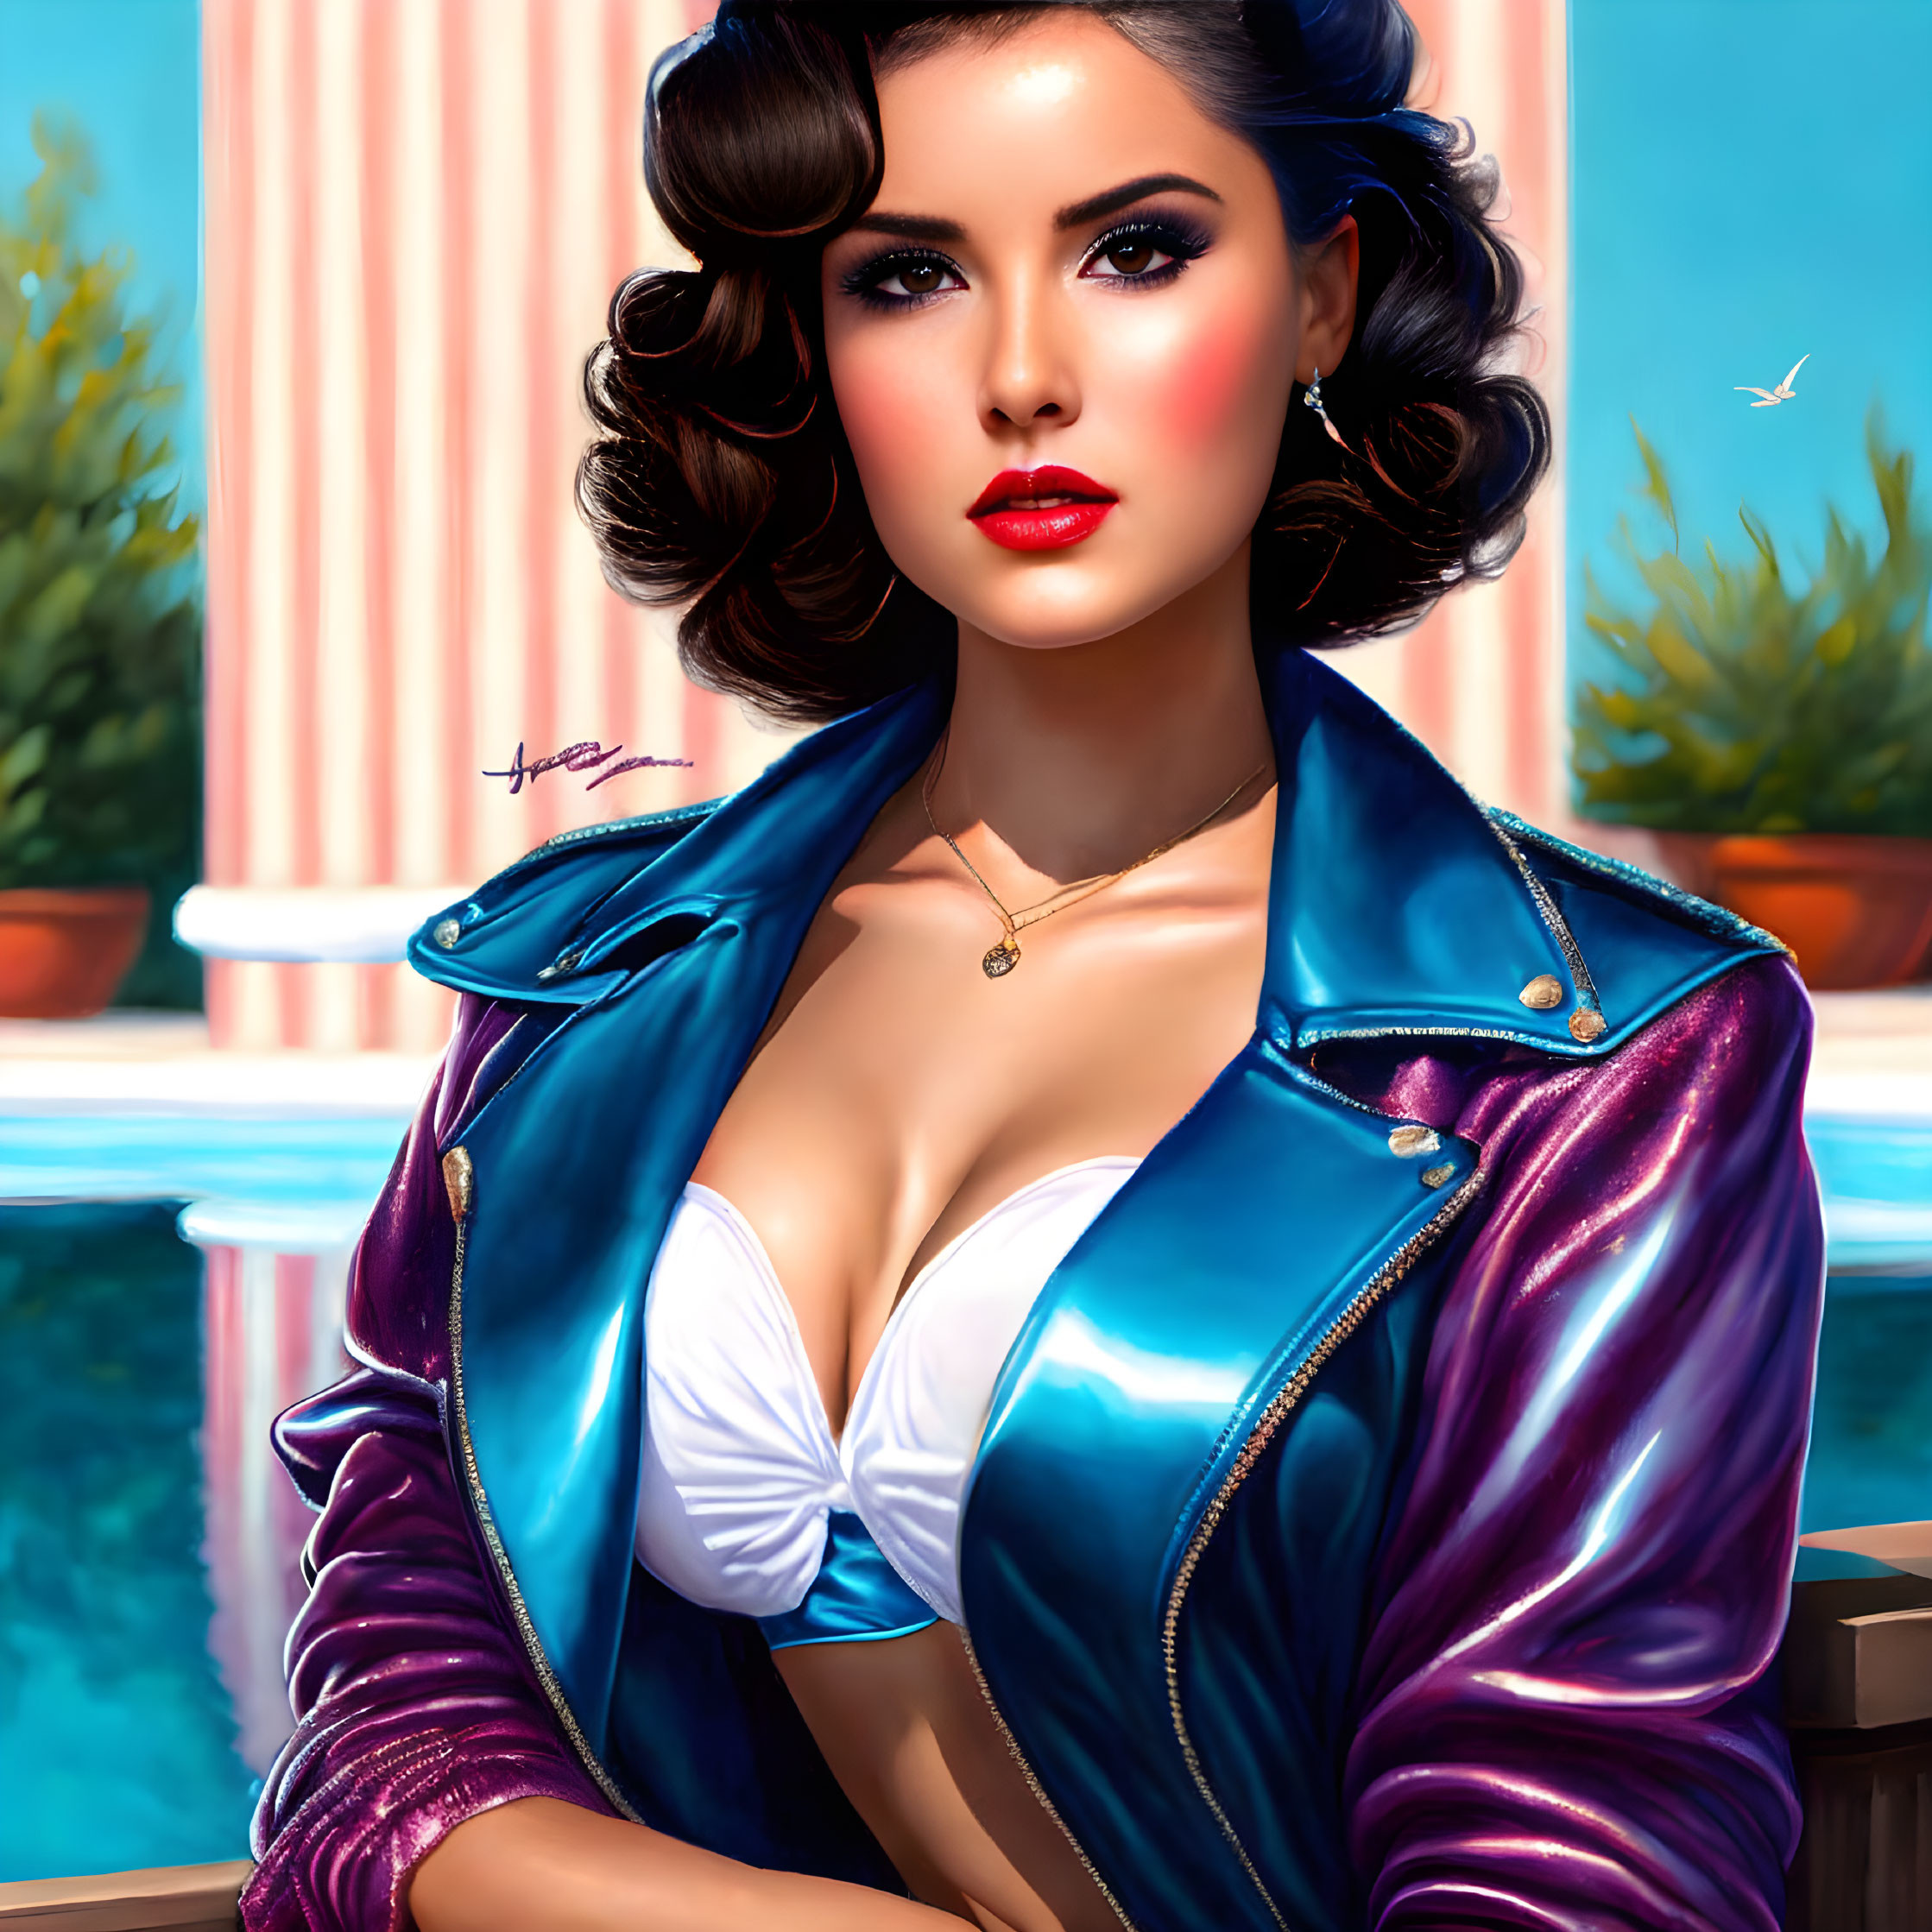 Pinup, sweet girl in an open classic jacket